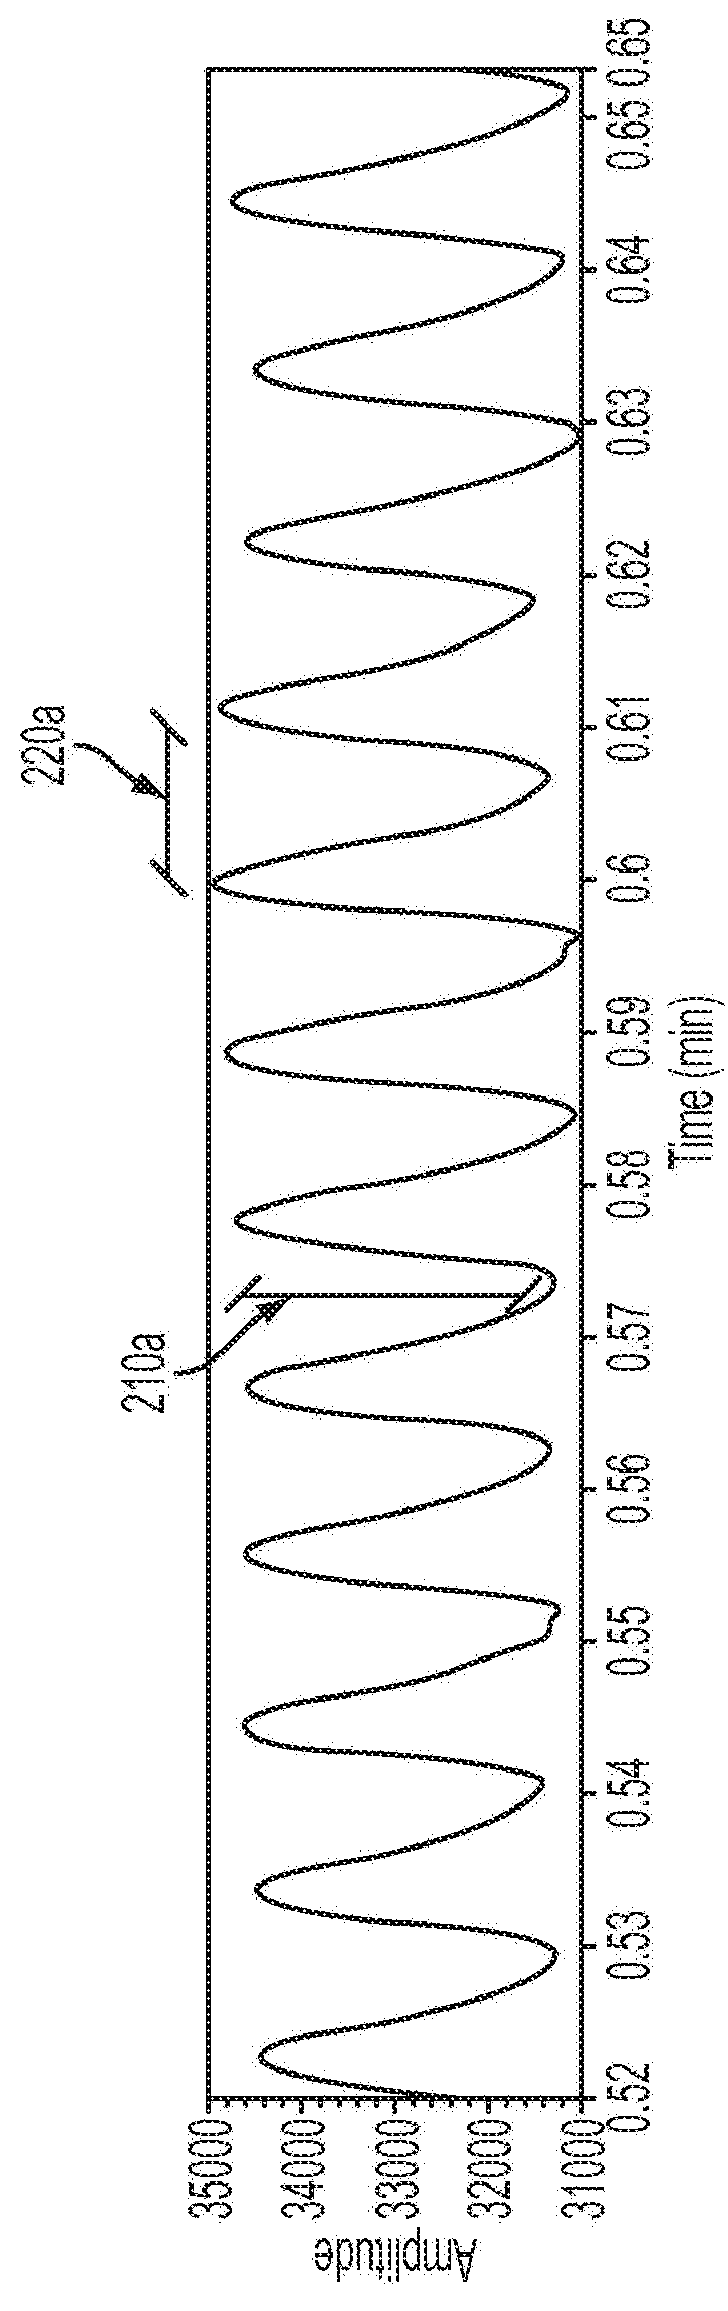 Methods And Systems For Predicting Hypovolemic Hypotensive Conditions Resulting From Bradycardia Behavior Using A Pulse Volume Waveform